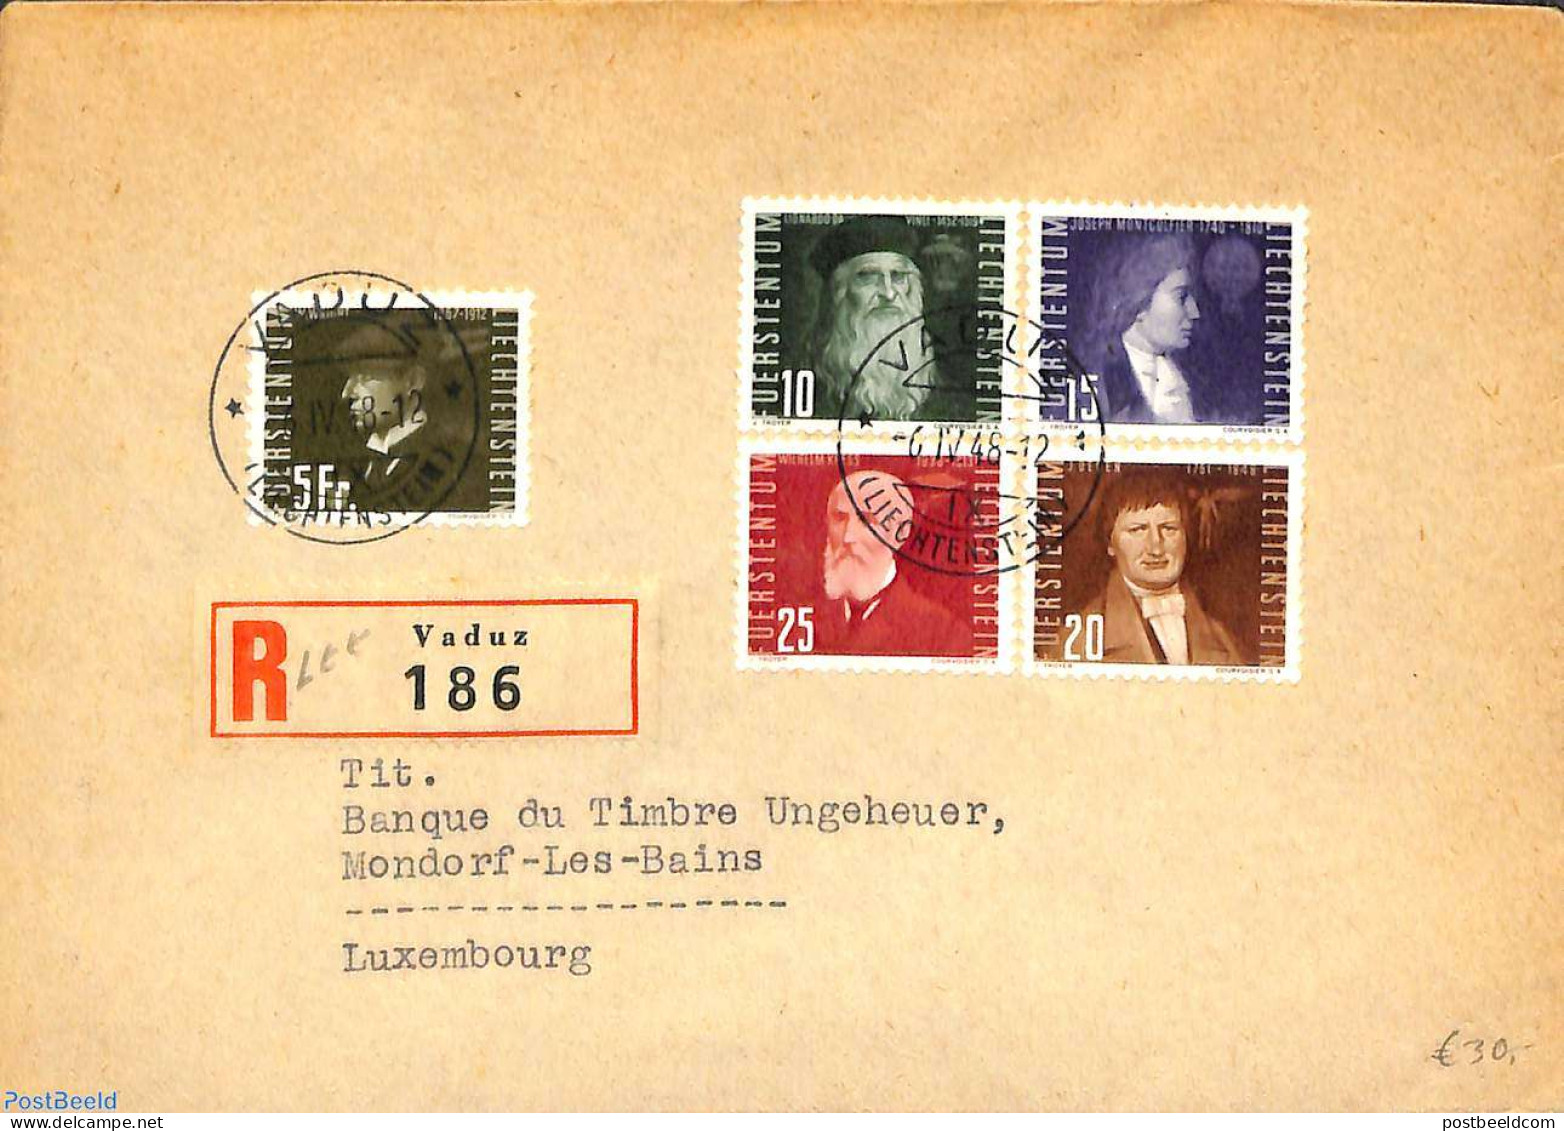 Liechtenstein 1948 Aviation Pioneers 5v, FDC, First Day Cover, Transport - Aircraft & Aviation - Covers & Documents